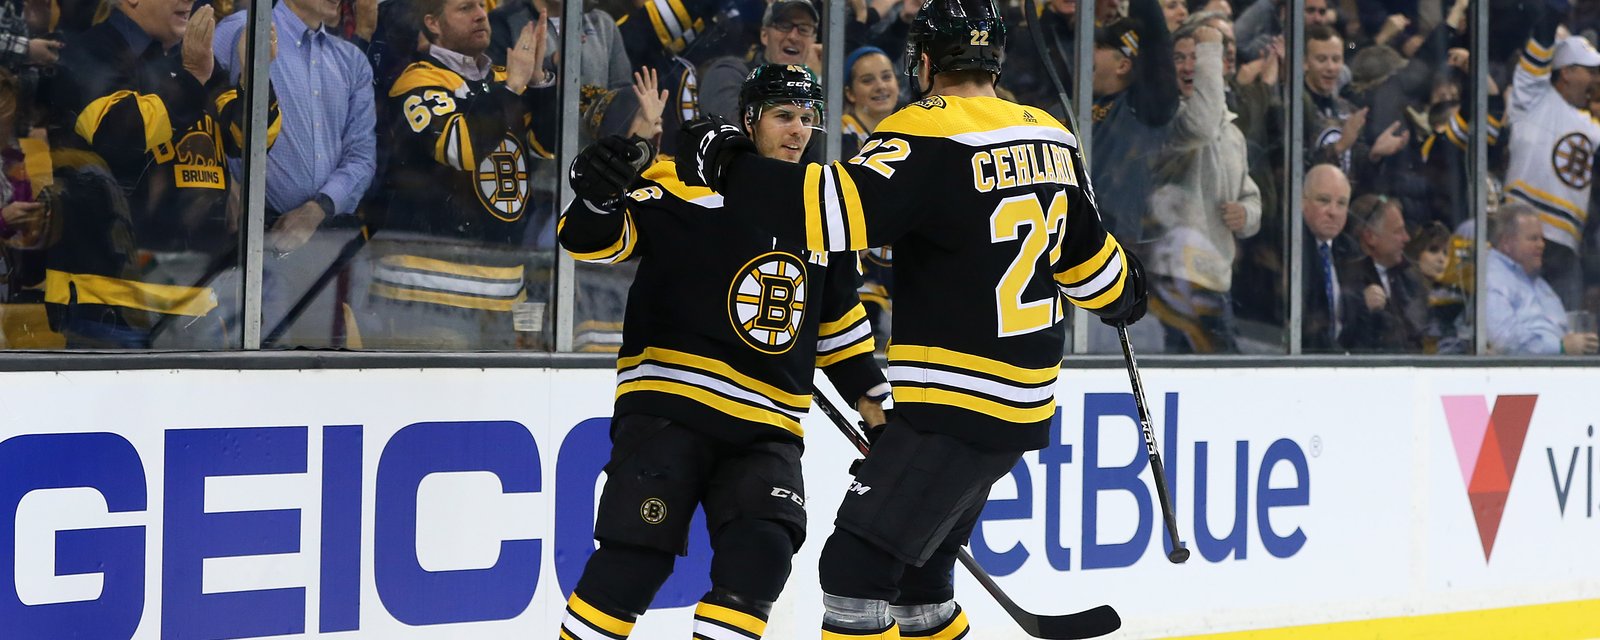 Bruins make significant changes ahead of game against Red Wings